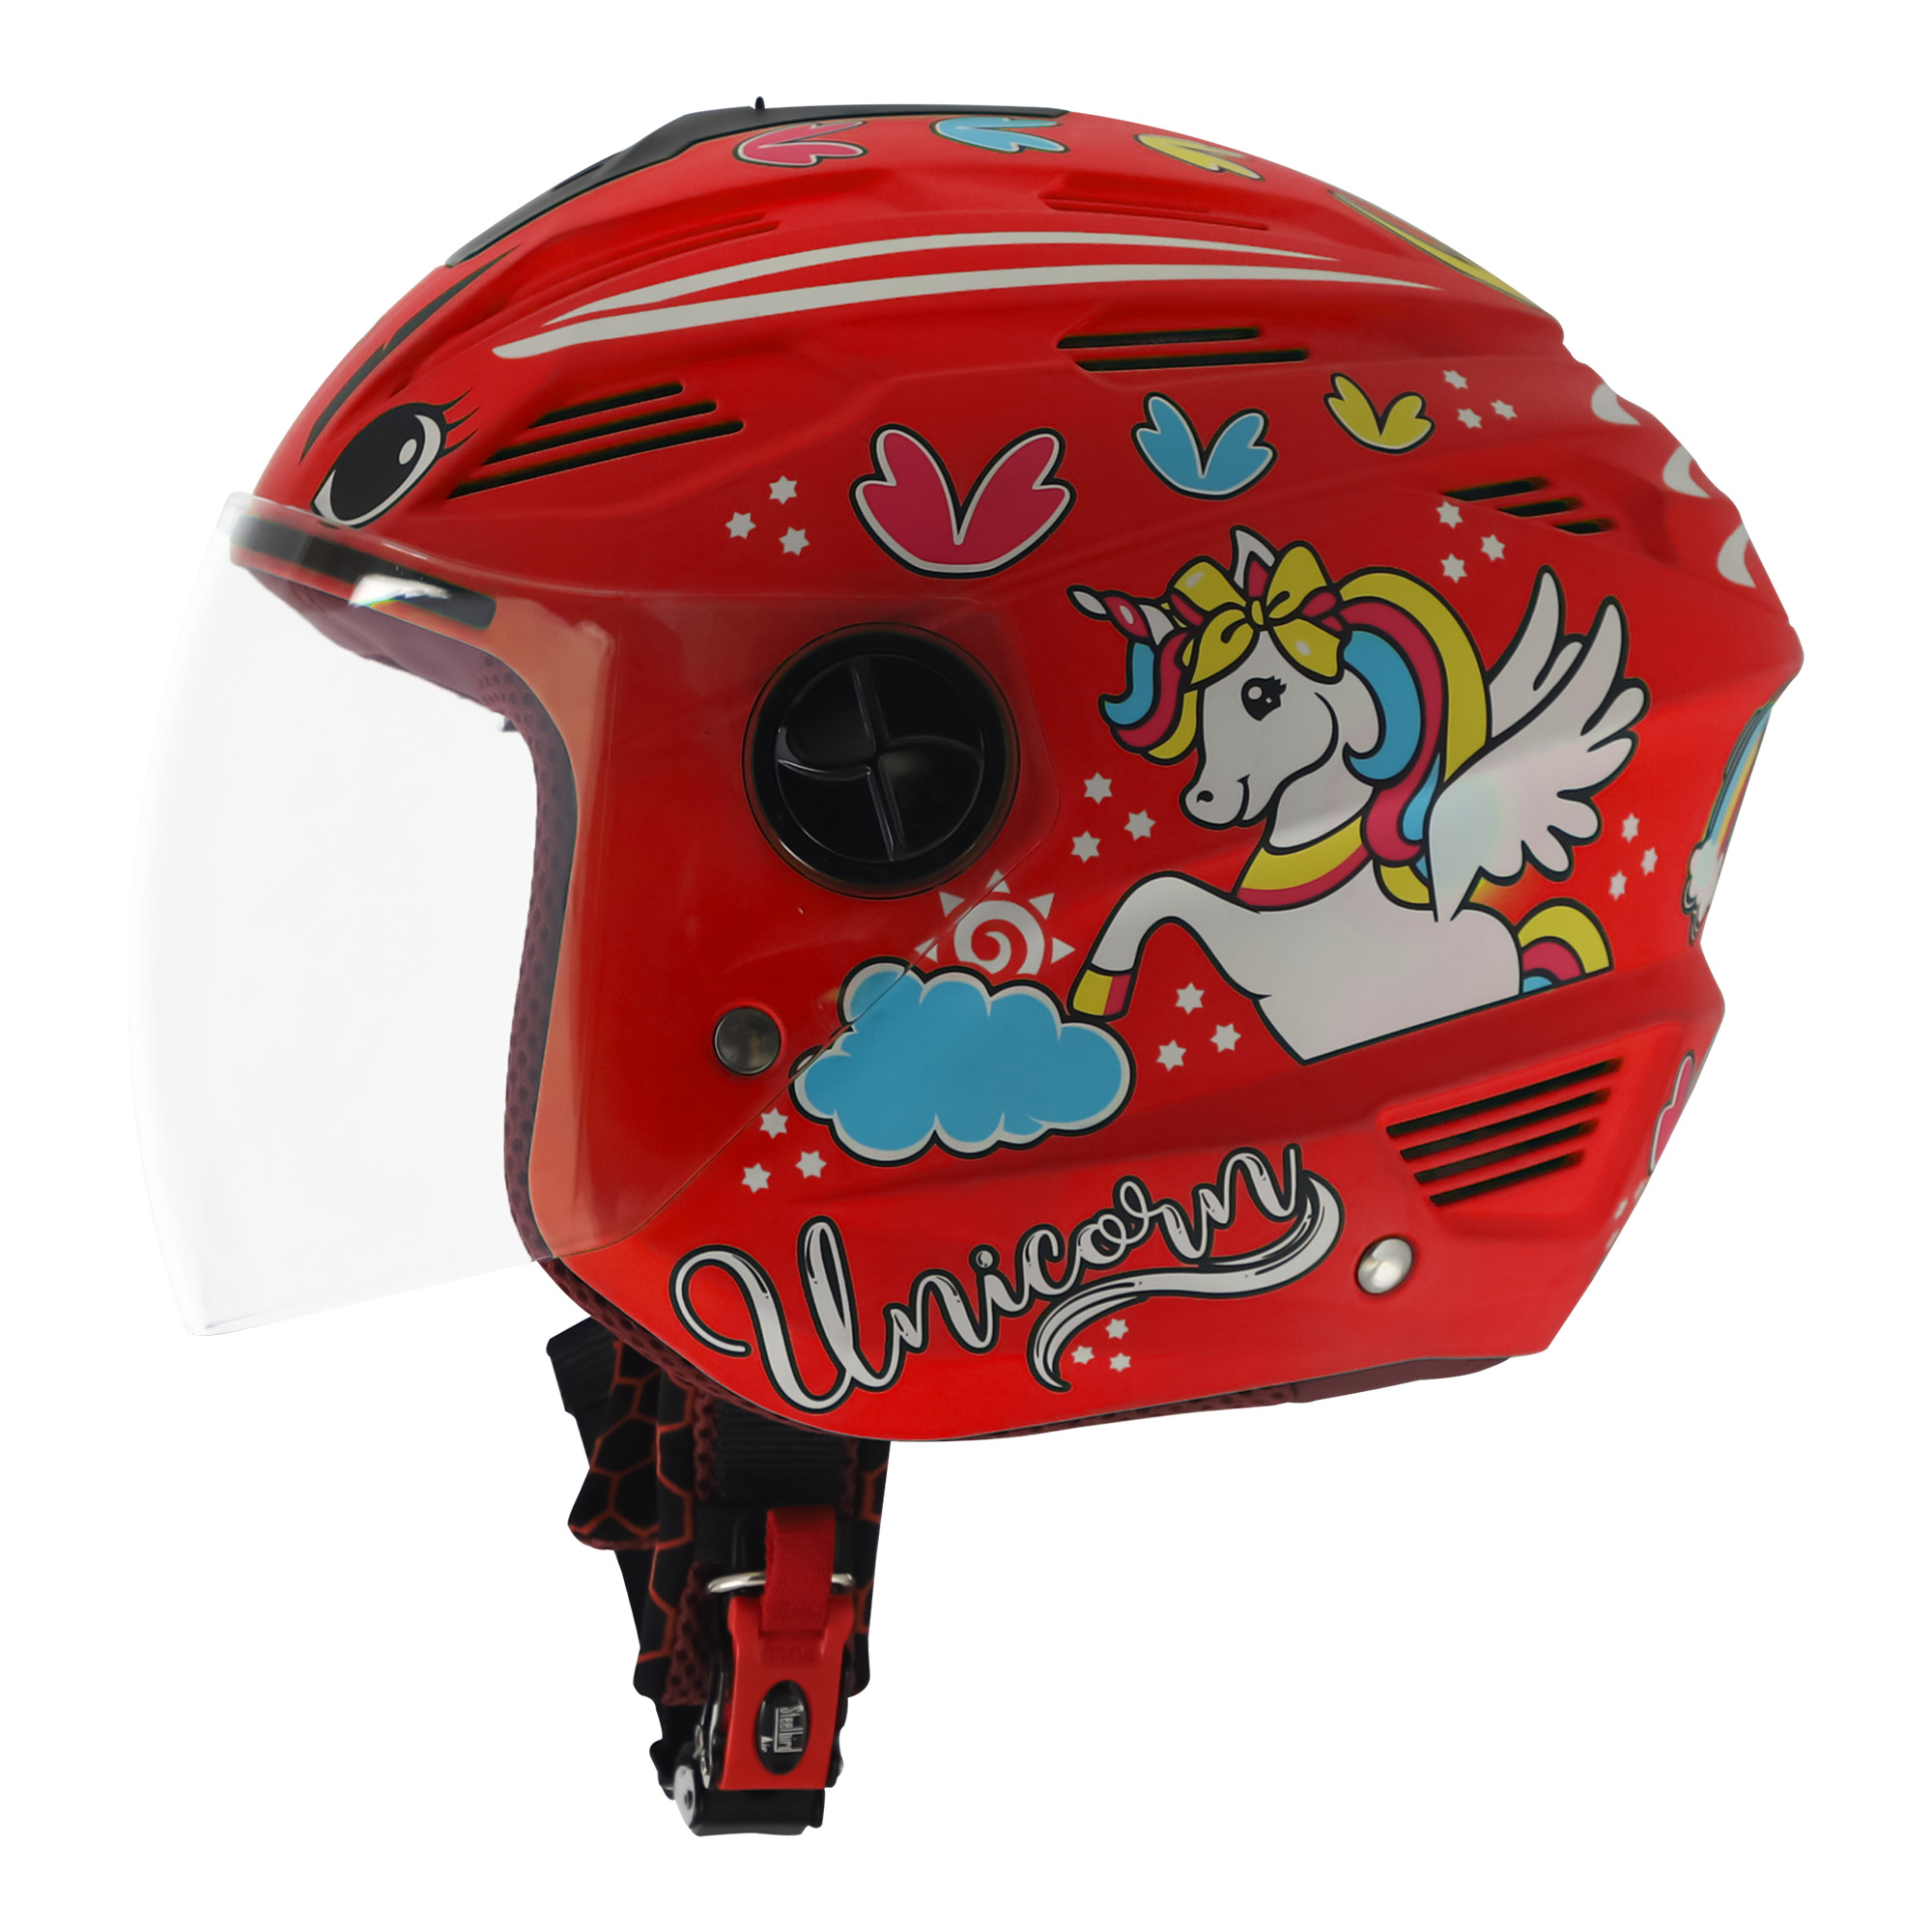 Steelbird SBA-6 Unicorn ISI Certified Open Face Helmet for Men and Women (Glossy Red with Clear Visor)